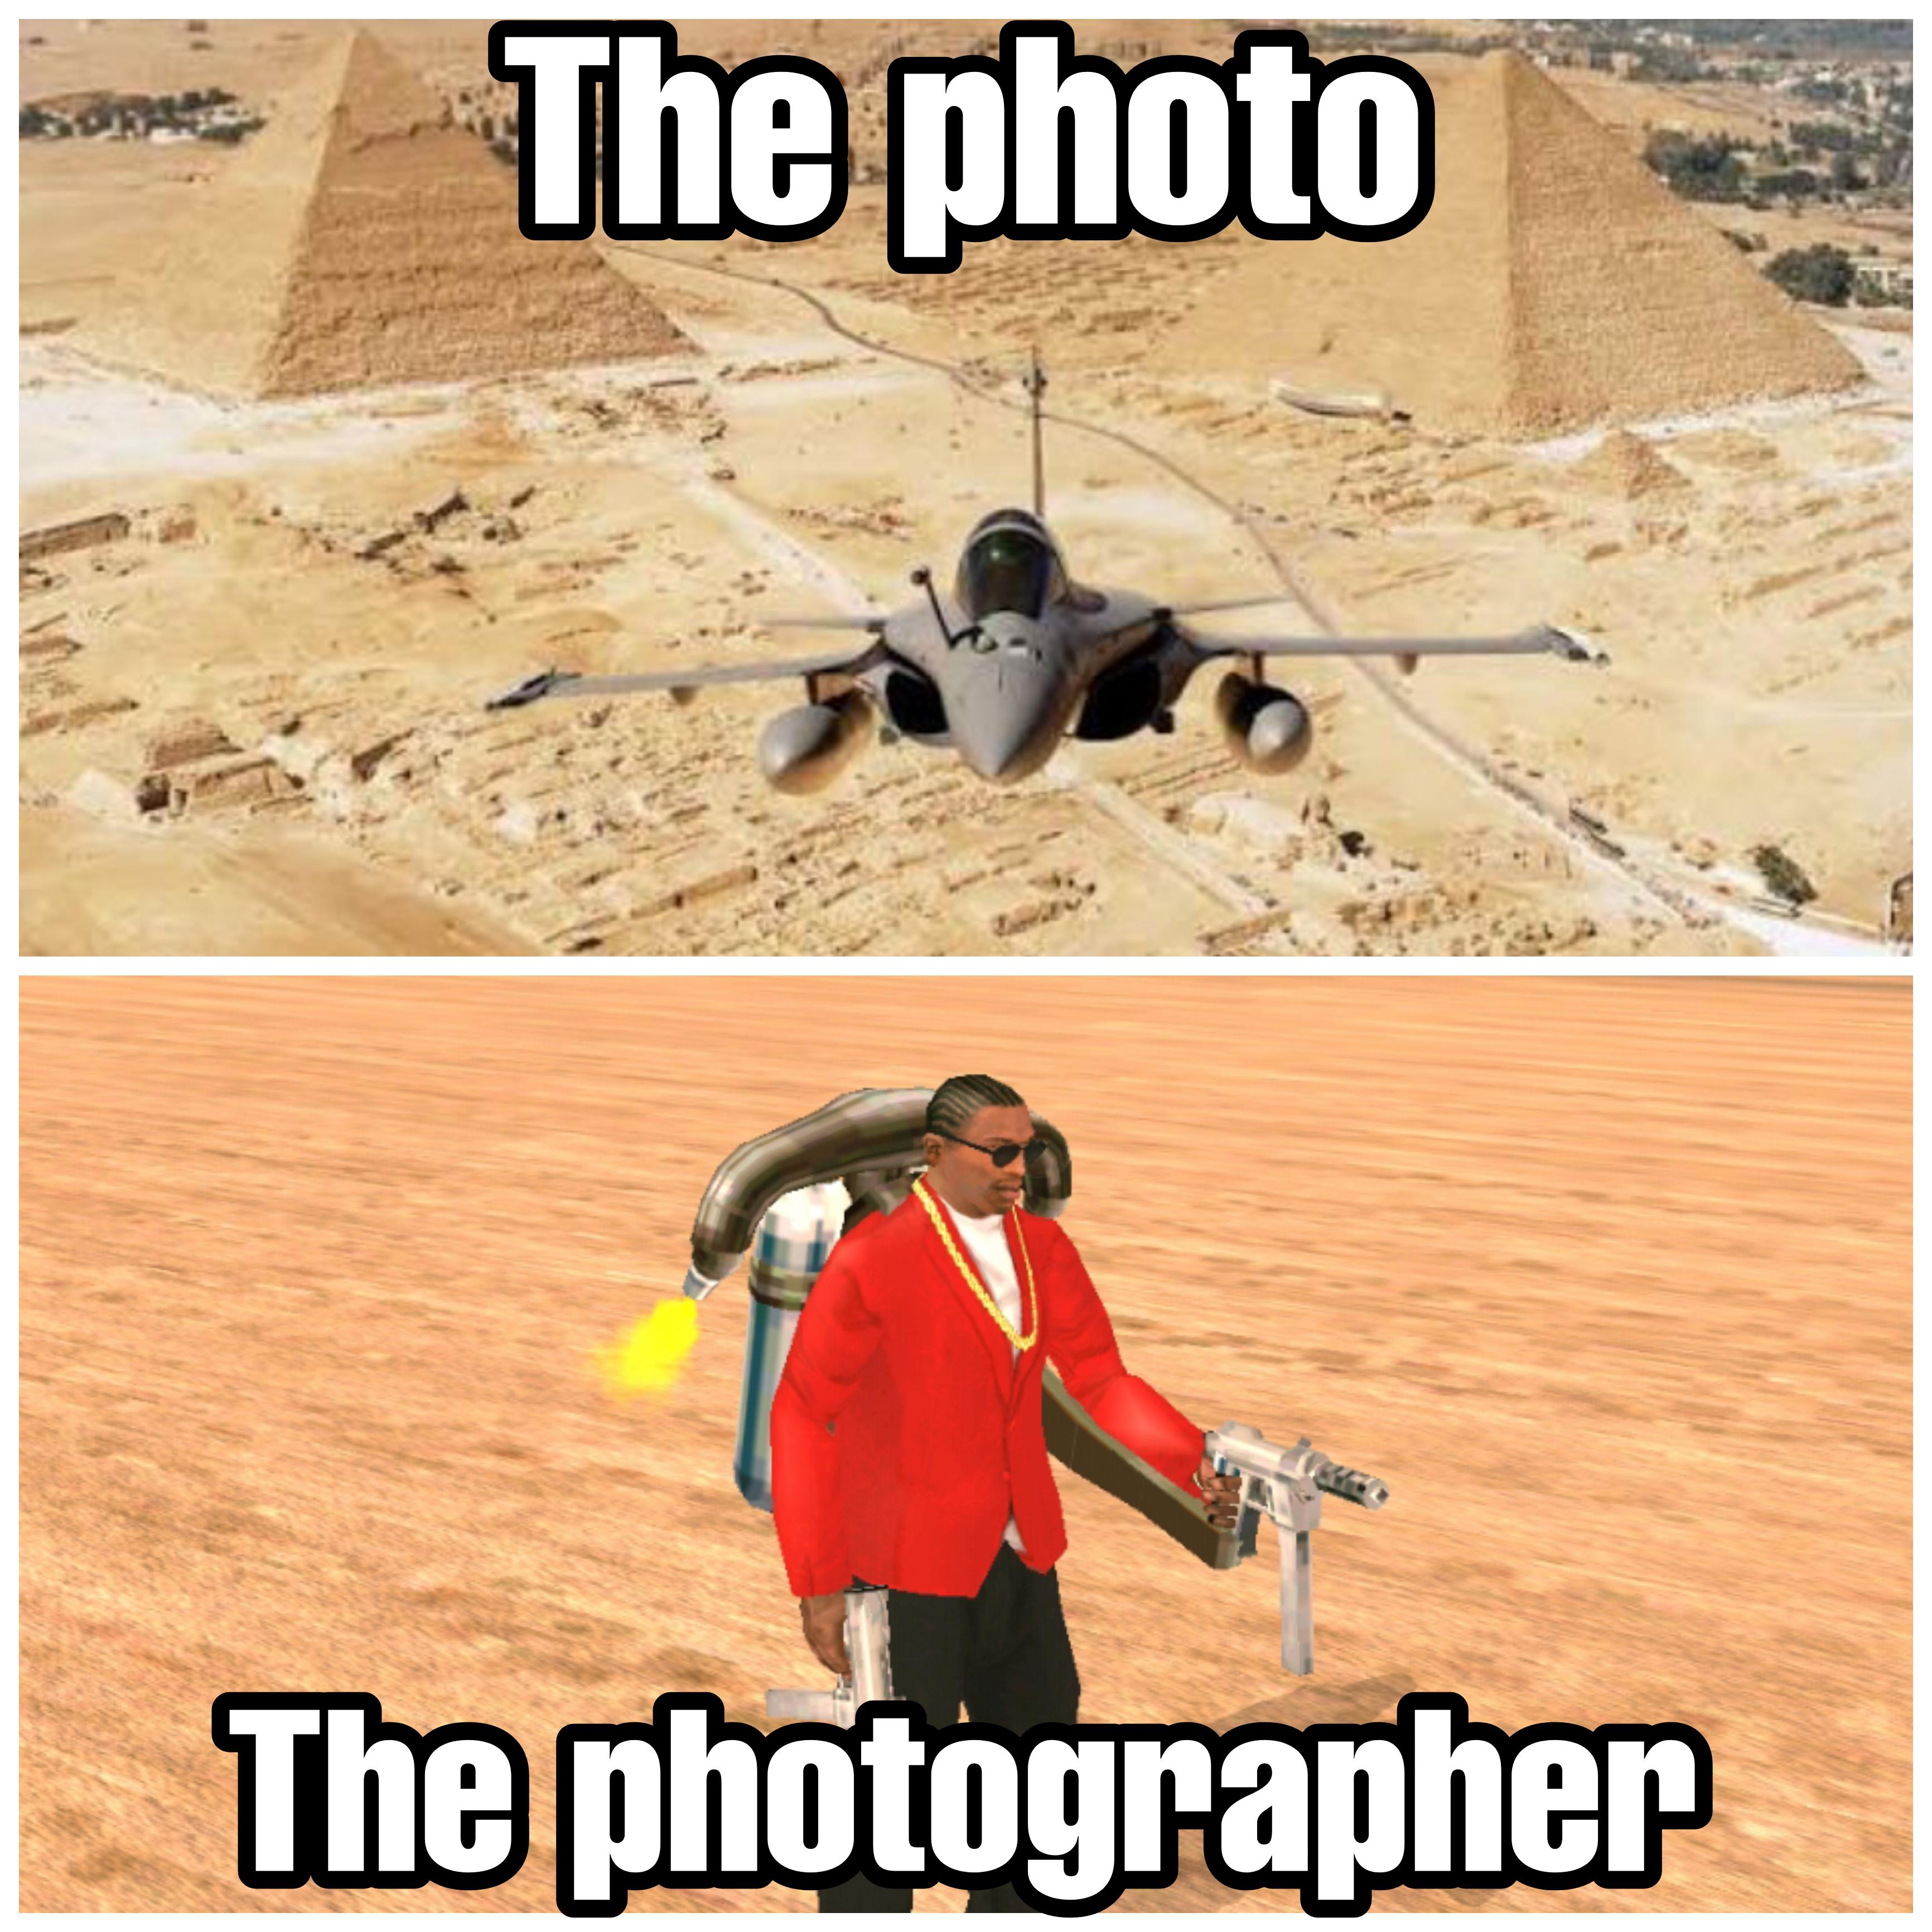 The photo The photographer